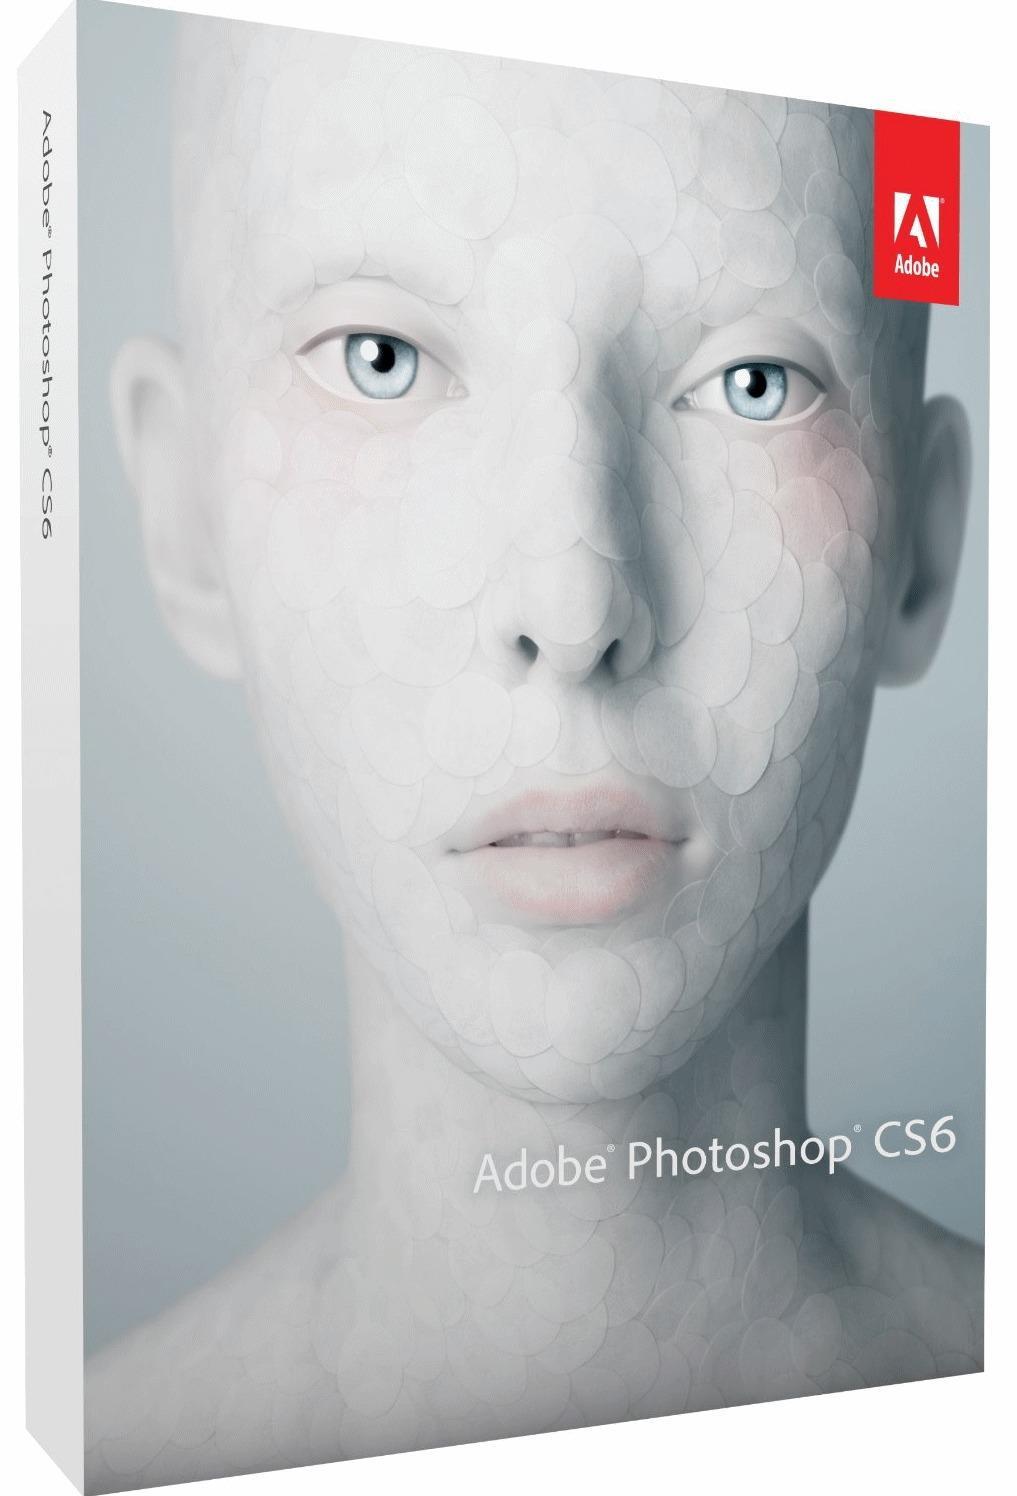 Introduction Adobe Photoshop is a graphics editing program, or image editing software, that allows you to create and manipulate visual images on the computer.